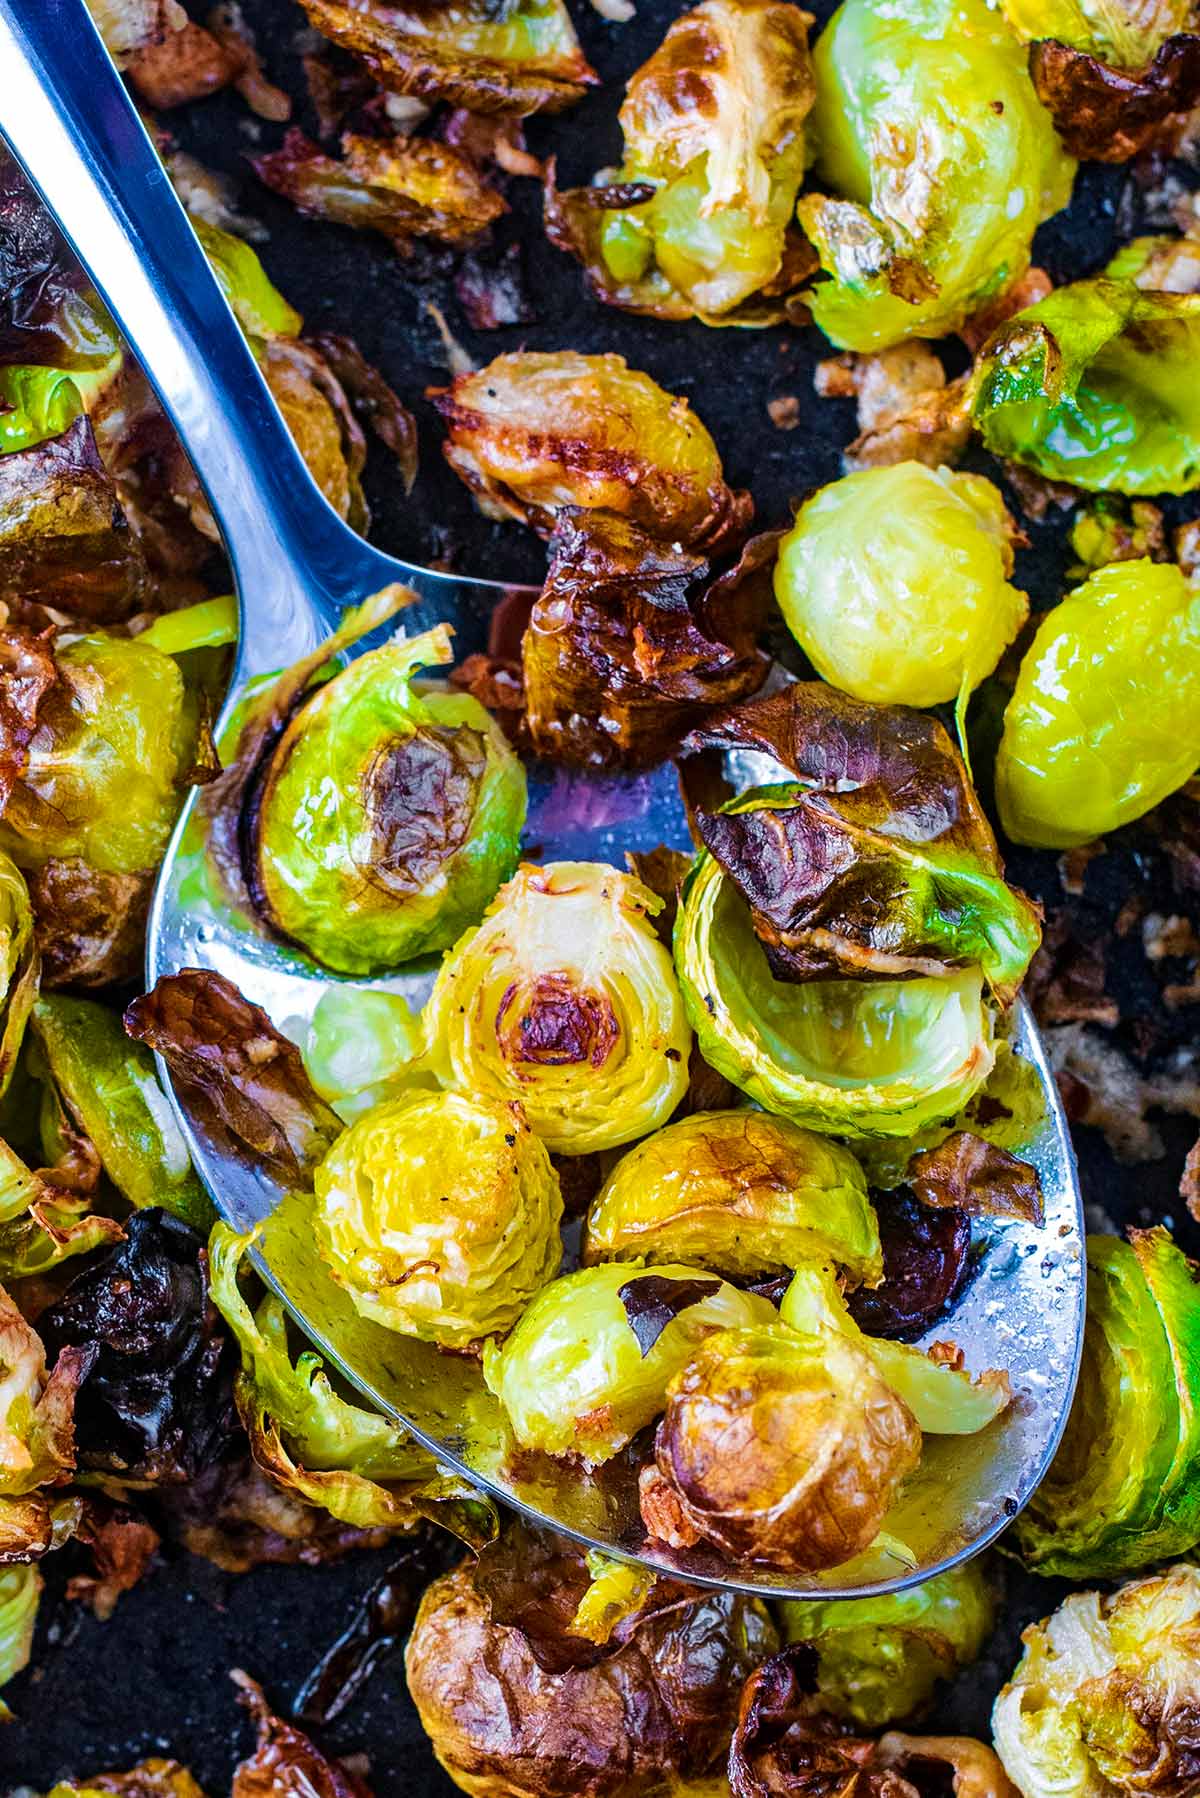 A spoon lifting up some roasted Brussels sprouts.